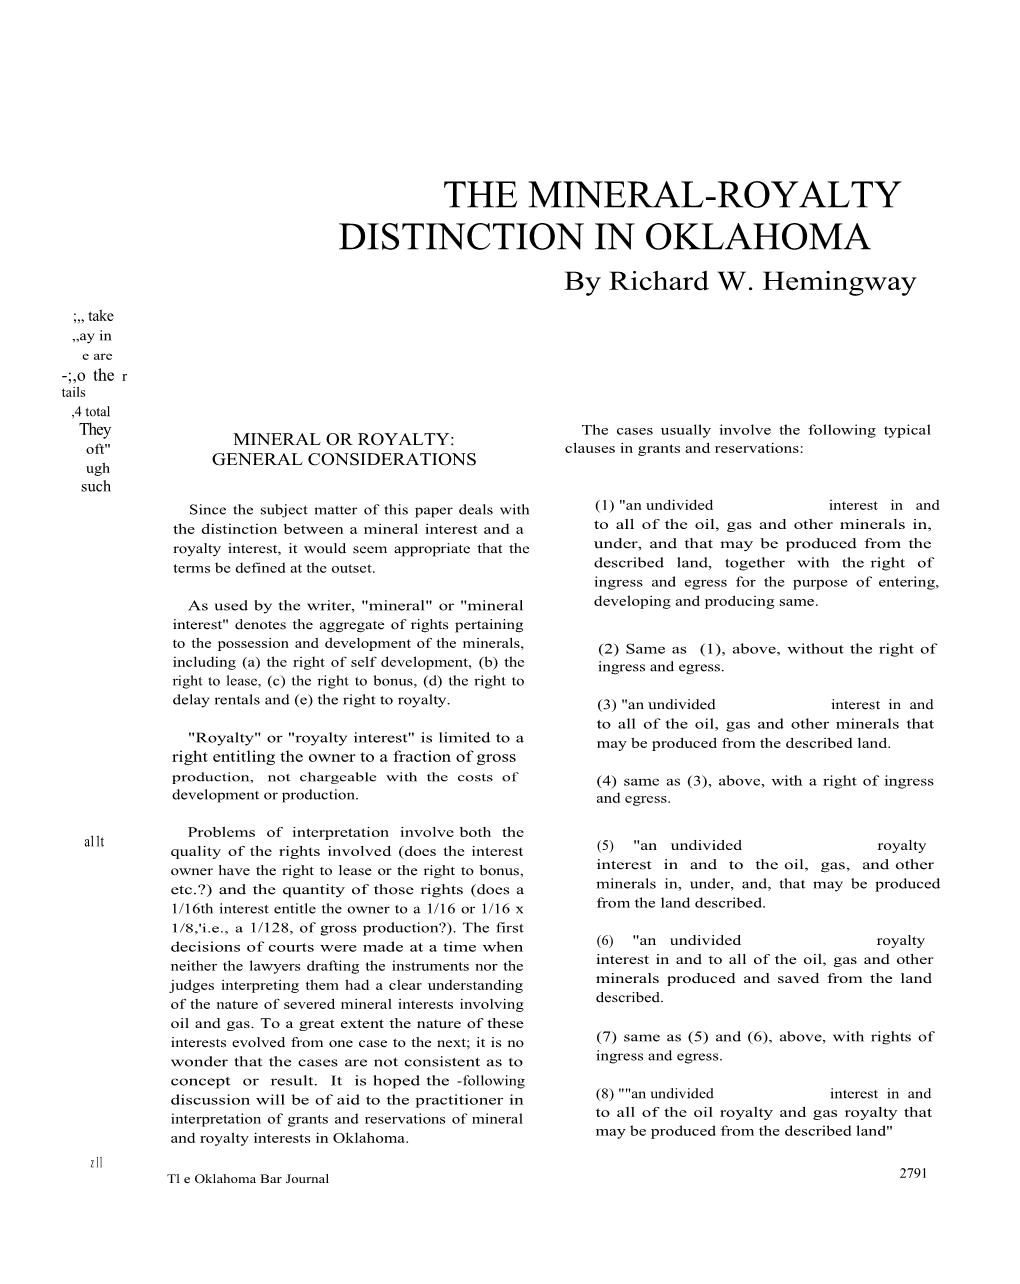 The Mineral-Royalty